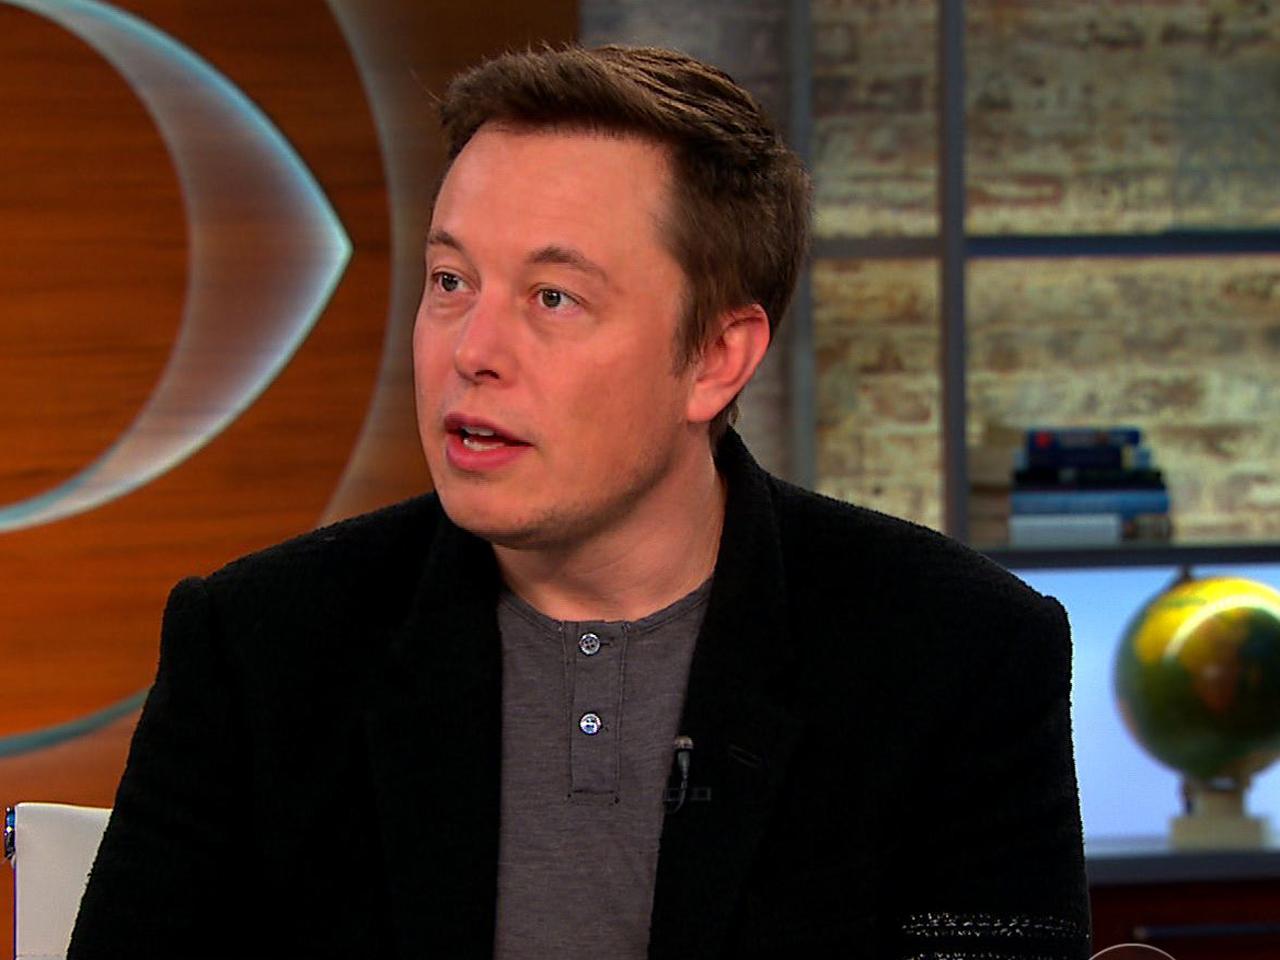 Elon Musk, in 2014. (Source: CBS / Reproduction)